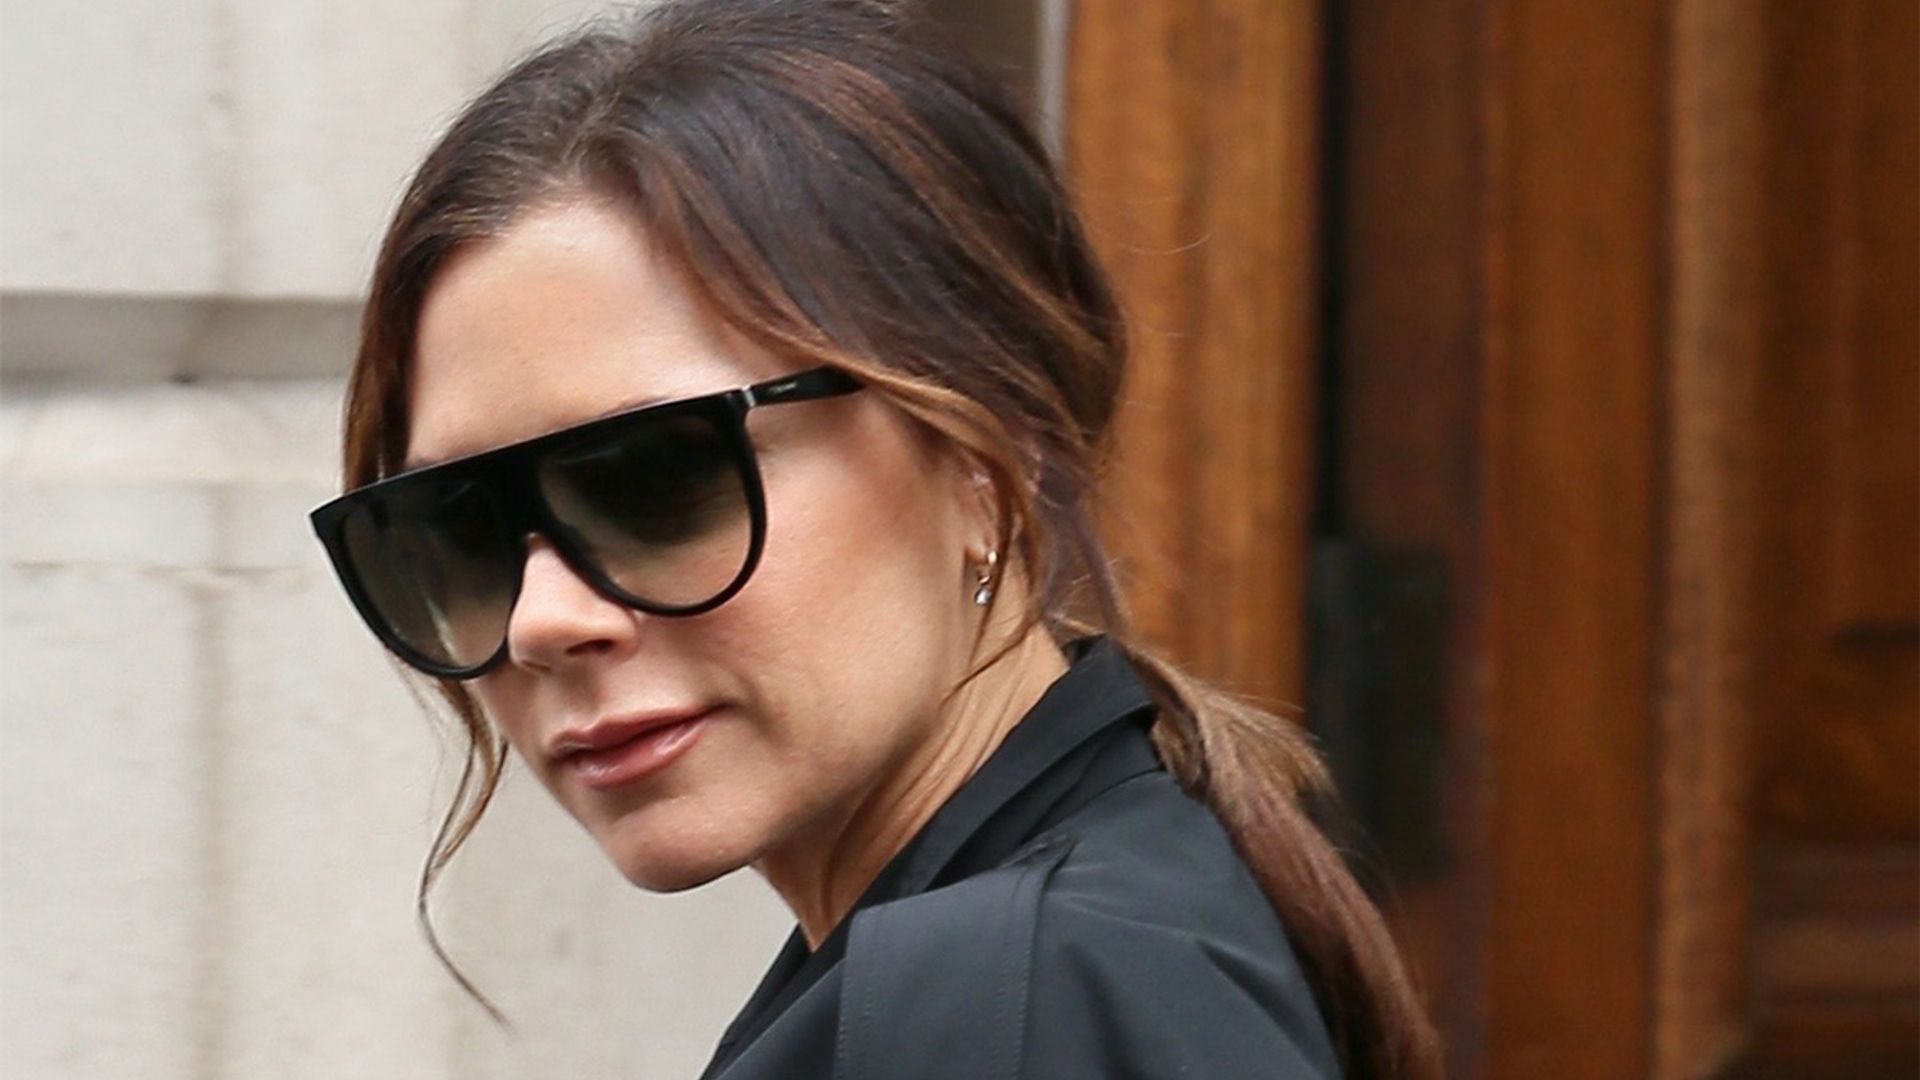 Victoria Beckham just wore CRAZY neon trainers and now we seriously need a pair